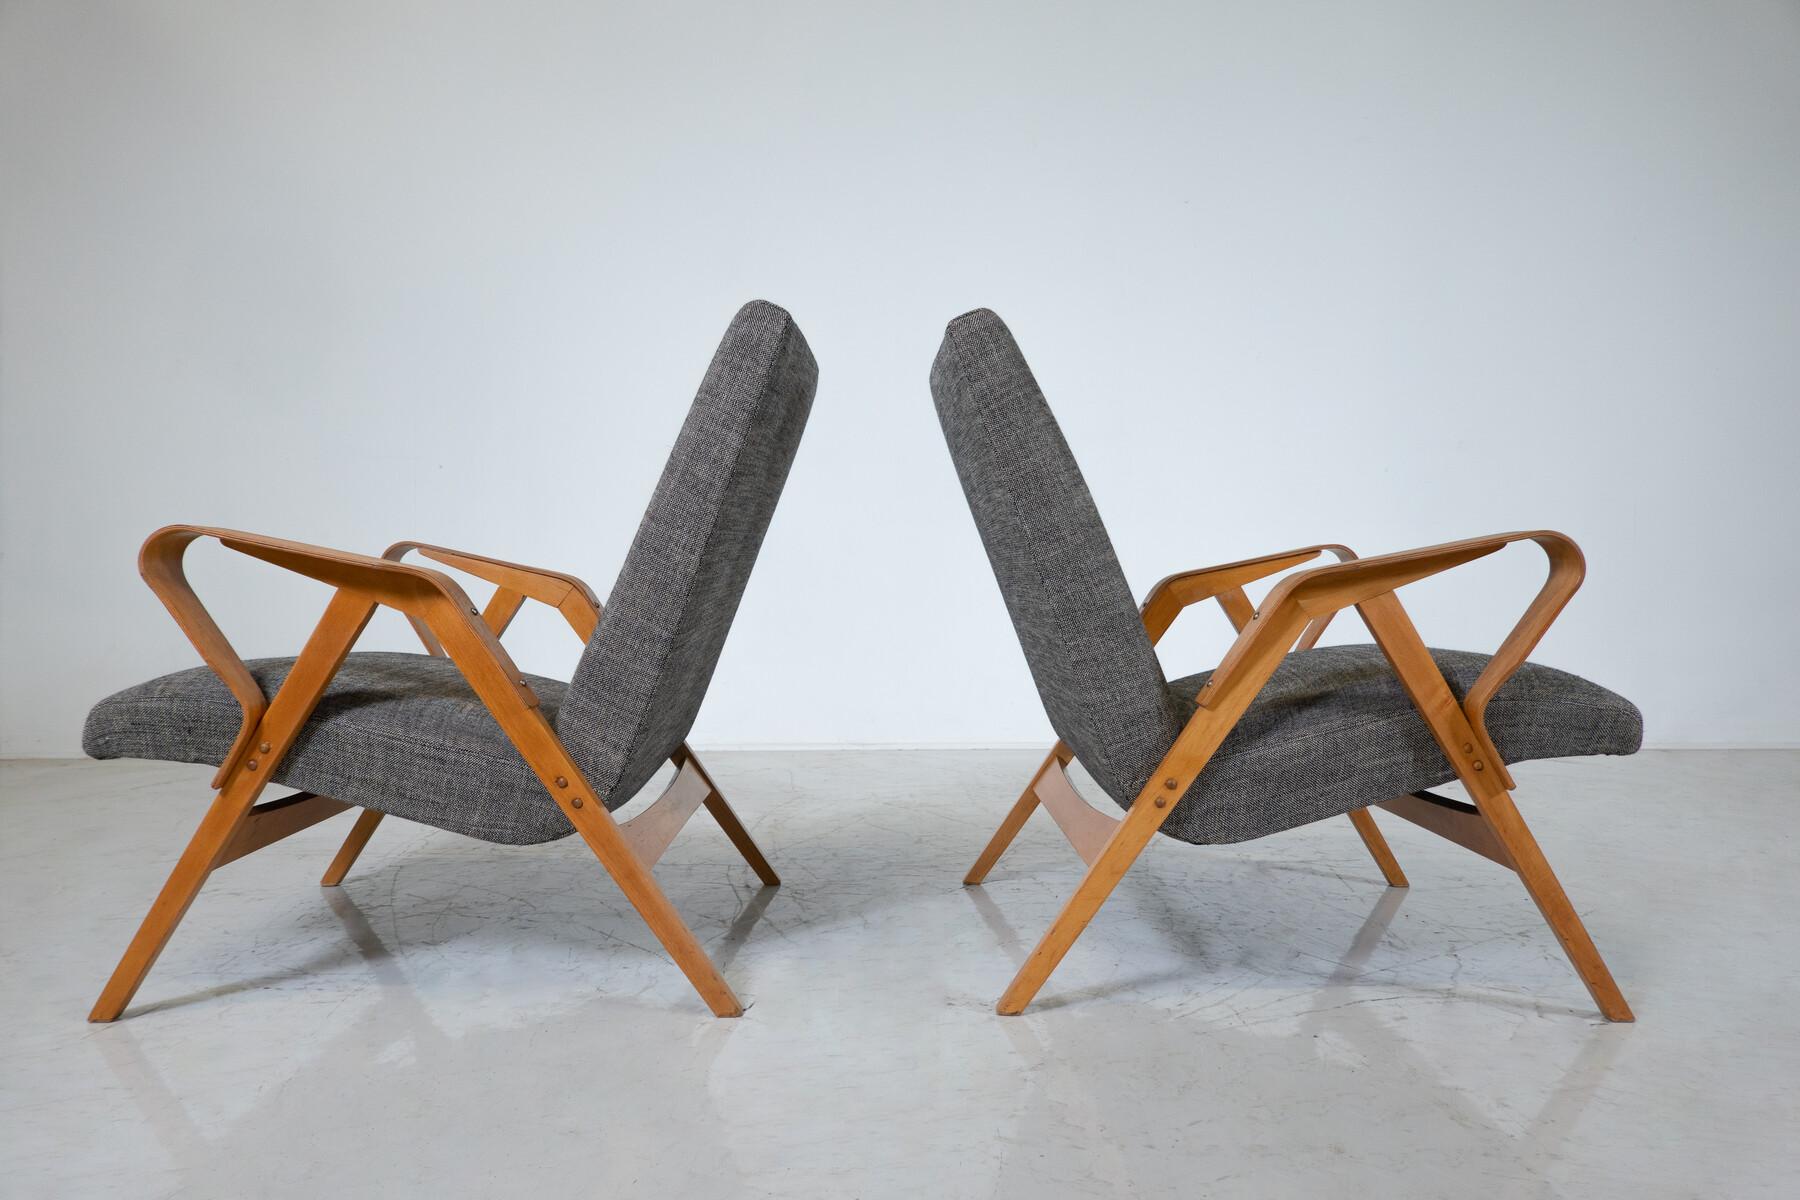 Mid-Century Modern Pair of Armchairs, 1950s, Czech Republic (New Ulphostery) For Sale 3